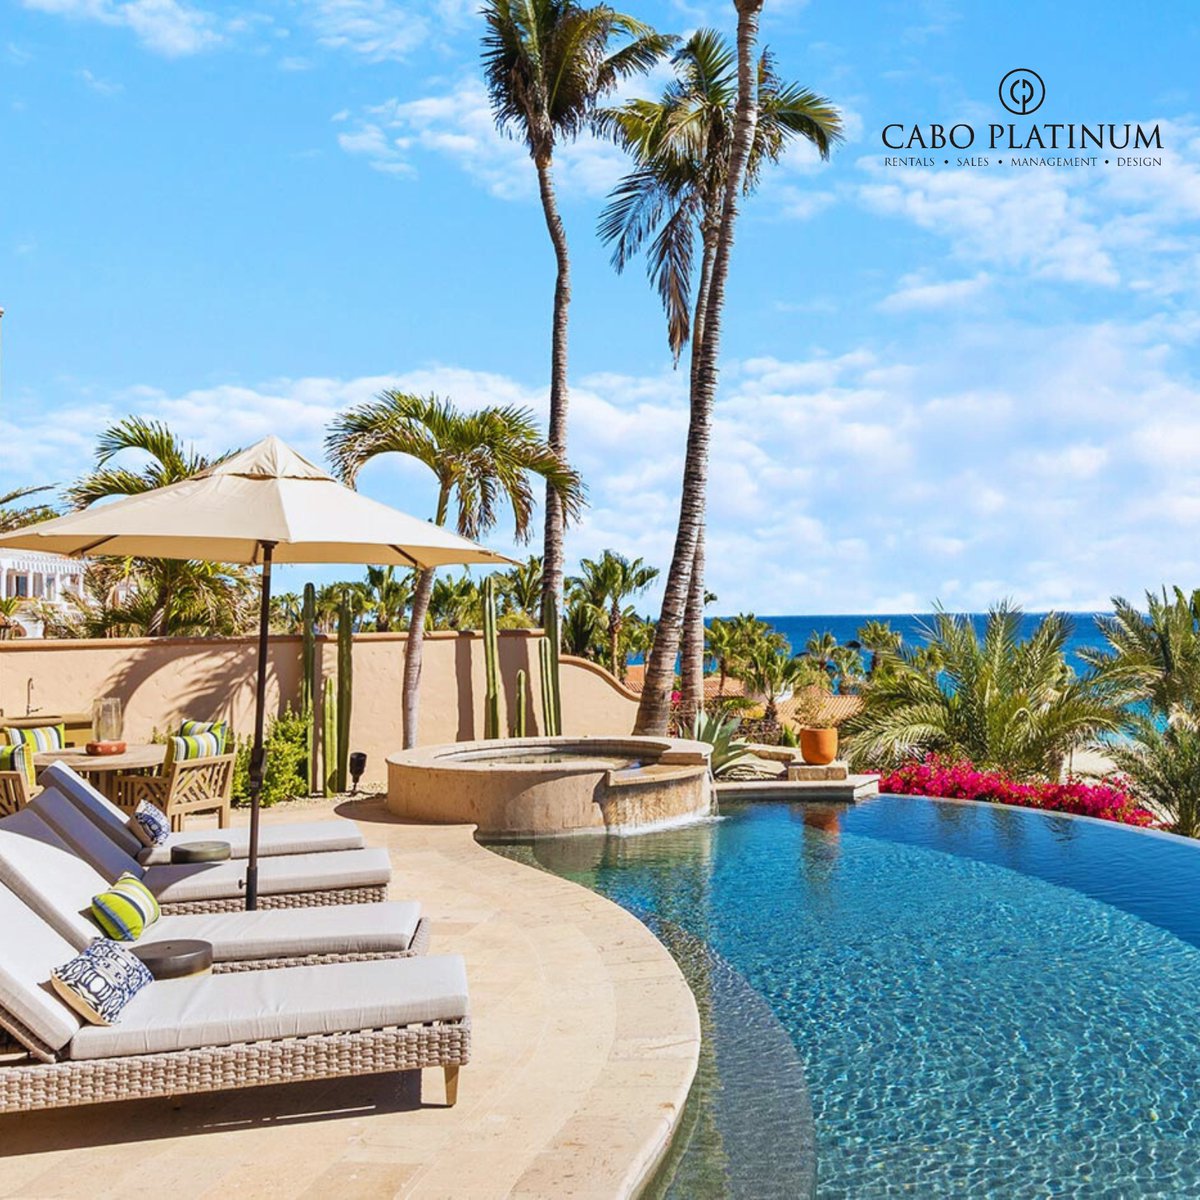 Guests of Villas Del Mar 361 fall in love with this villa's natural beauty and open-concept design, allowing you to move through the main living area and pool patio seamlessly. 

Book your ultimate luxury getaway: caboplatinum.com

#caboplatinum #luxuryvillarentals